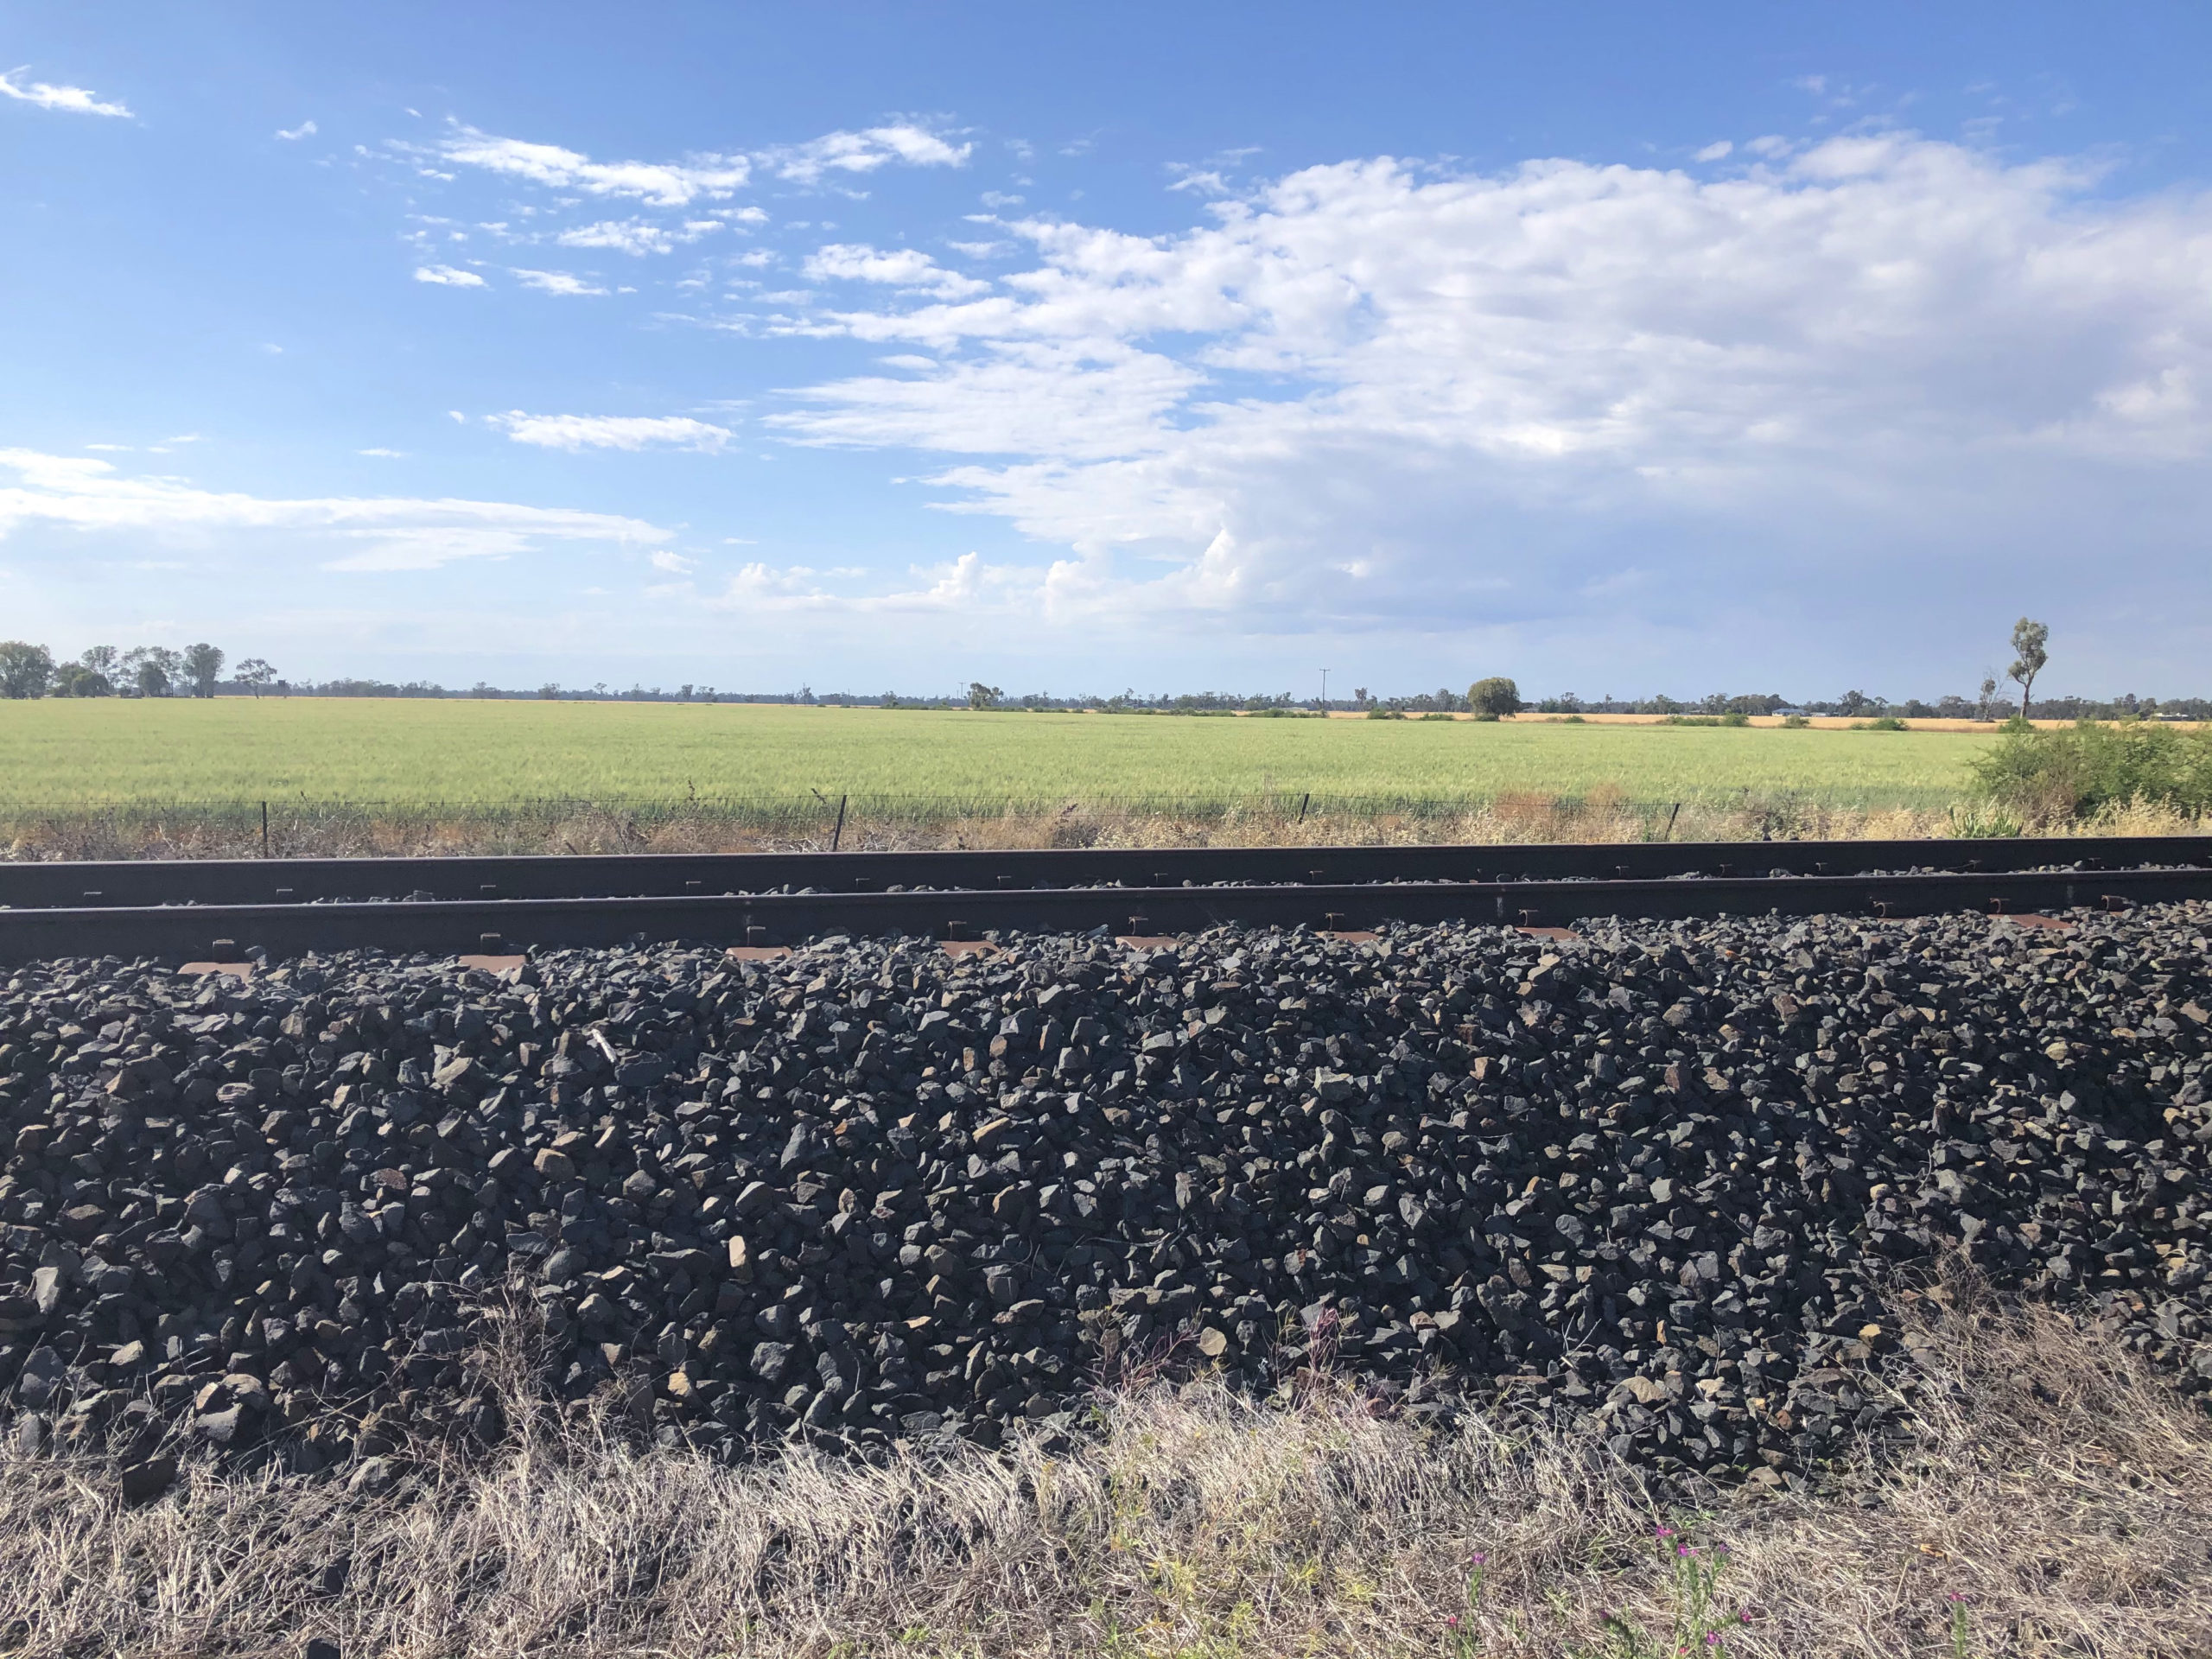 Track on the Narrabri to North Star section